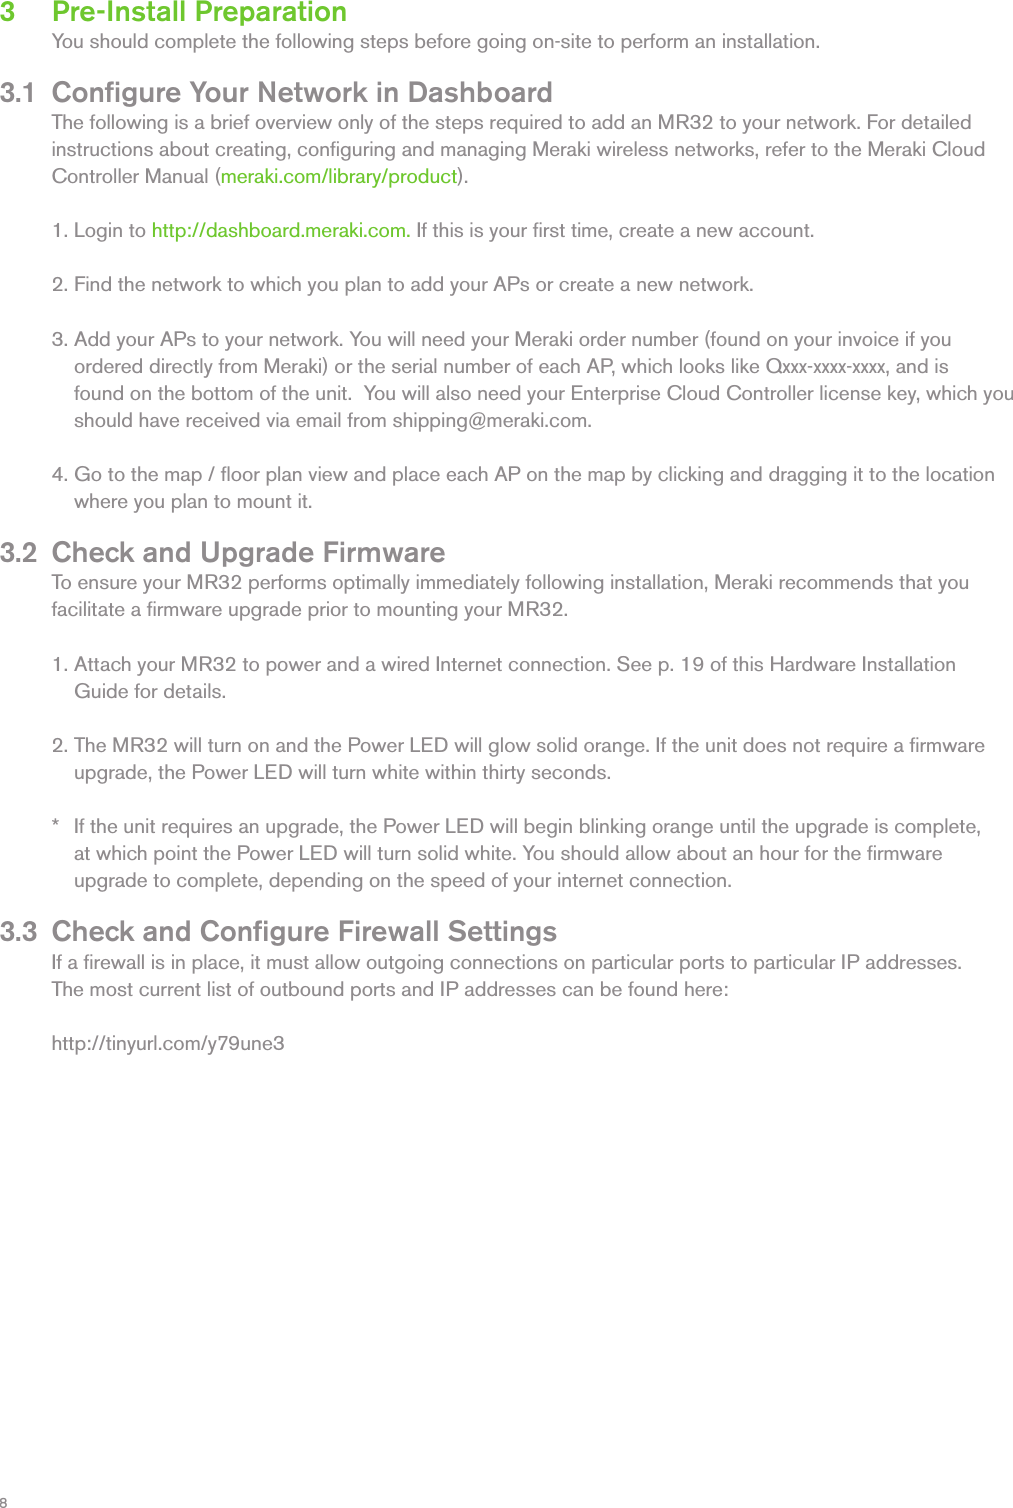 83   Pre-Install Preparation  You should complete the following steps before going on-site to perform an installation. 3.1  Conﬁgure Your Network in Dashboard  The following is a brief overview only of the steps required to add an MR32 to your network. For detailed   instructions about creating, conﬁguring and managing Meraki wireless networks, refer to the Meraki Cloud   Controller Manual (meraki.com/library/product).   1. Login to http://dashboard.meraki.com. If this is your ﬁrst time, create a new account.   2. Find the network to which you plan to add your APs or create a new network.    3. Add your APs to your network. You will need your Meraki order number (found on your invoice if you      ordered directly from Meraki) or the serial number of each AP, which looks like Qxxx-xxxx-xxxx, and is      found on the bottom of the unit.  You will also need your Enterprise Cloud Controller license key, which you        should have received via email from shipping@meraki.com.   4. Go to the map / ﬂoor plan view and place each AP on the map by clicking and dragging it to the location        where you plan to mount it. 3.2  Check and Upgrade Firmware  To ensure your MR32 performs optimally immediately following installation, Meraki recommends that you   facilitate a ﬁrmware upgrade prior to mounting your MR32.   1. Attach your MR32 to power and a wired Internet connection. See p. 19 of this Hardware Installation     Guide for details.    2. The MR32 will turn on and the Power LED will glow solid orange. If the unit does not require a ﬁrmware     upgrade, the Power LED will turn white within thirty seconds.     *   If the unit requires an upgrade, the Power LED will begin blinking orange until the upgrade is complete,      at which point the Power LED will turn solid white. You should allow about an hour for the ﬁrmware      upgrade to complete, depending on the speed of your internet connection. 3.3  Check and Conﬁgure Firewall Settings  If a ﬁrewall is in place, it must allow outgoing connections on particular ports to particular IP addresses.     The most current list of outbound ports and IP addresses can be found here:  http://tinyurl.com/y79une3 